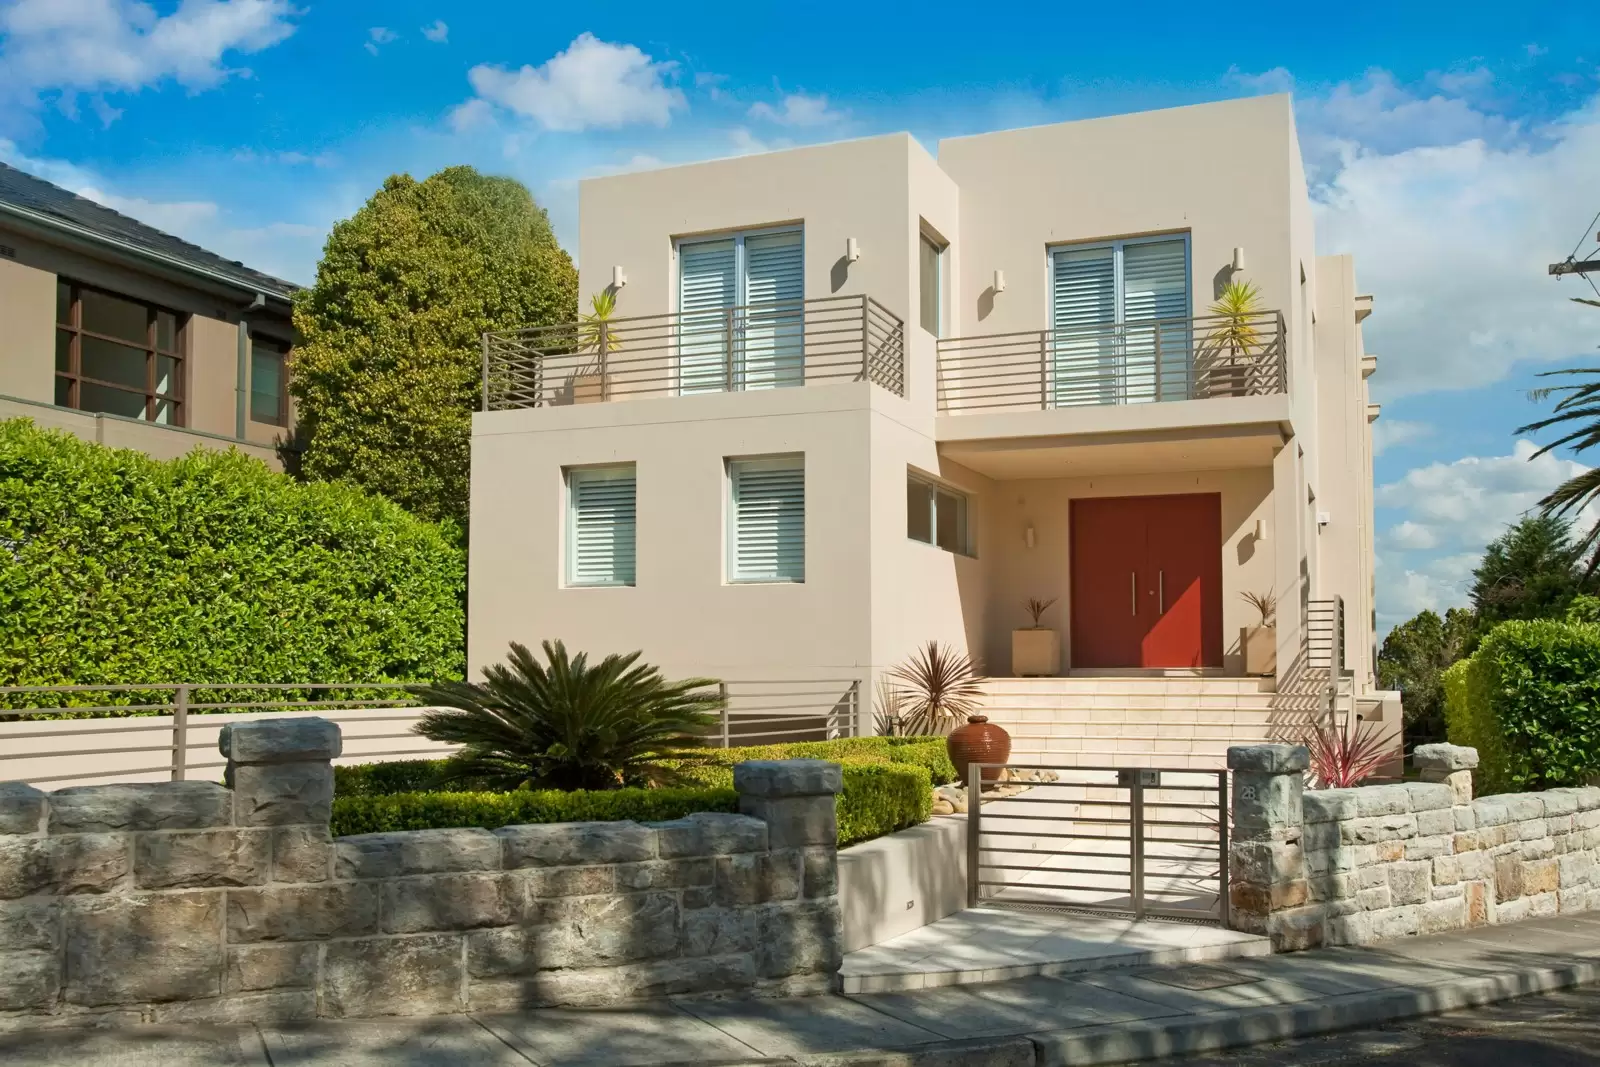 Photo #14: 2B Nulla Street, Vaucluse - Sold by Sydney Sotheby's International Realty